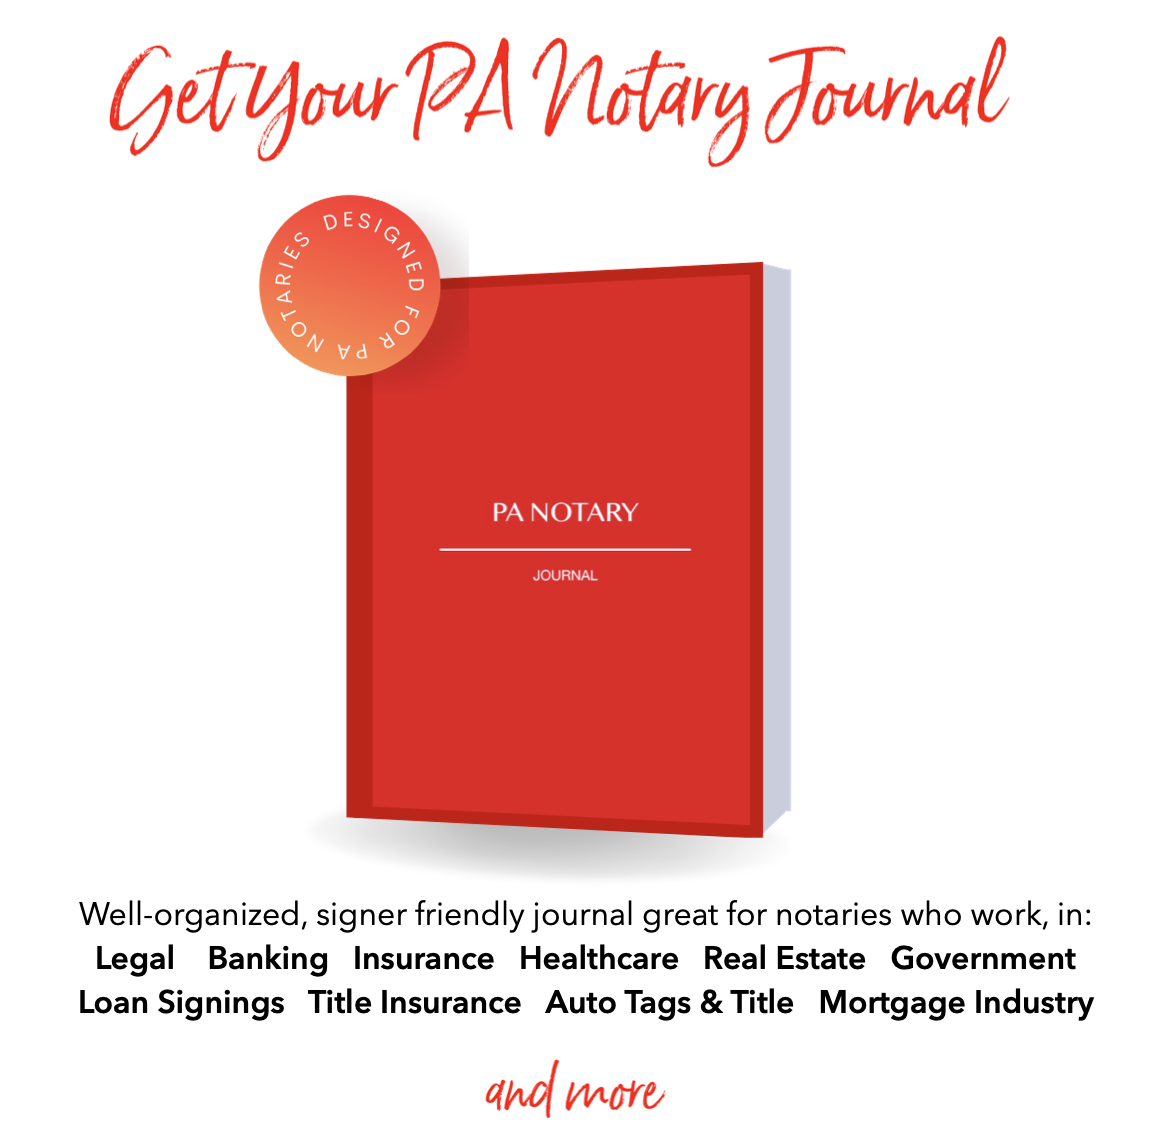 Get Your PA Notary Journal